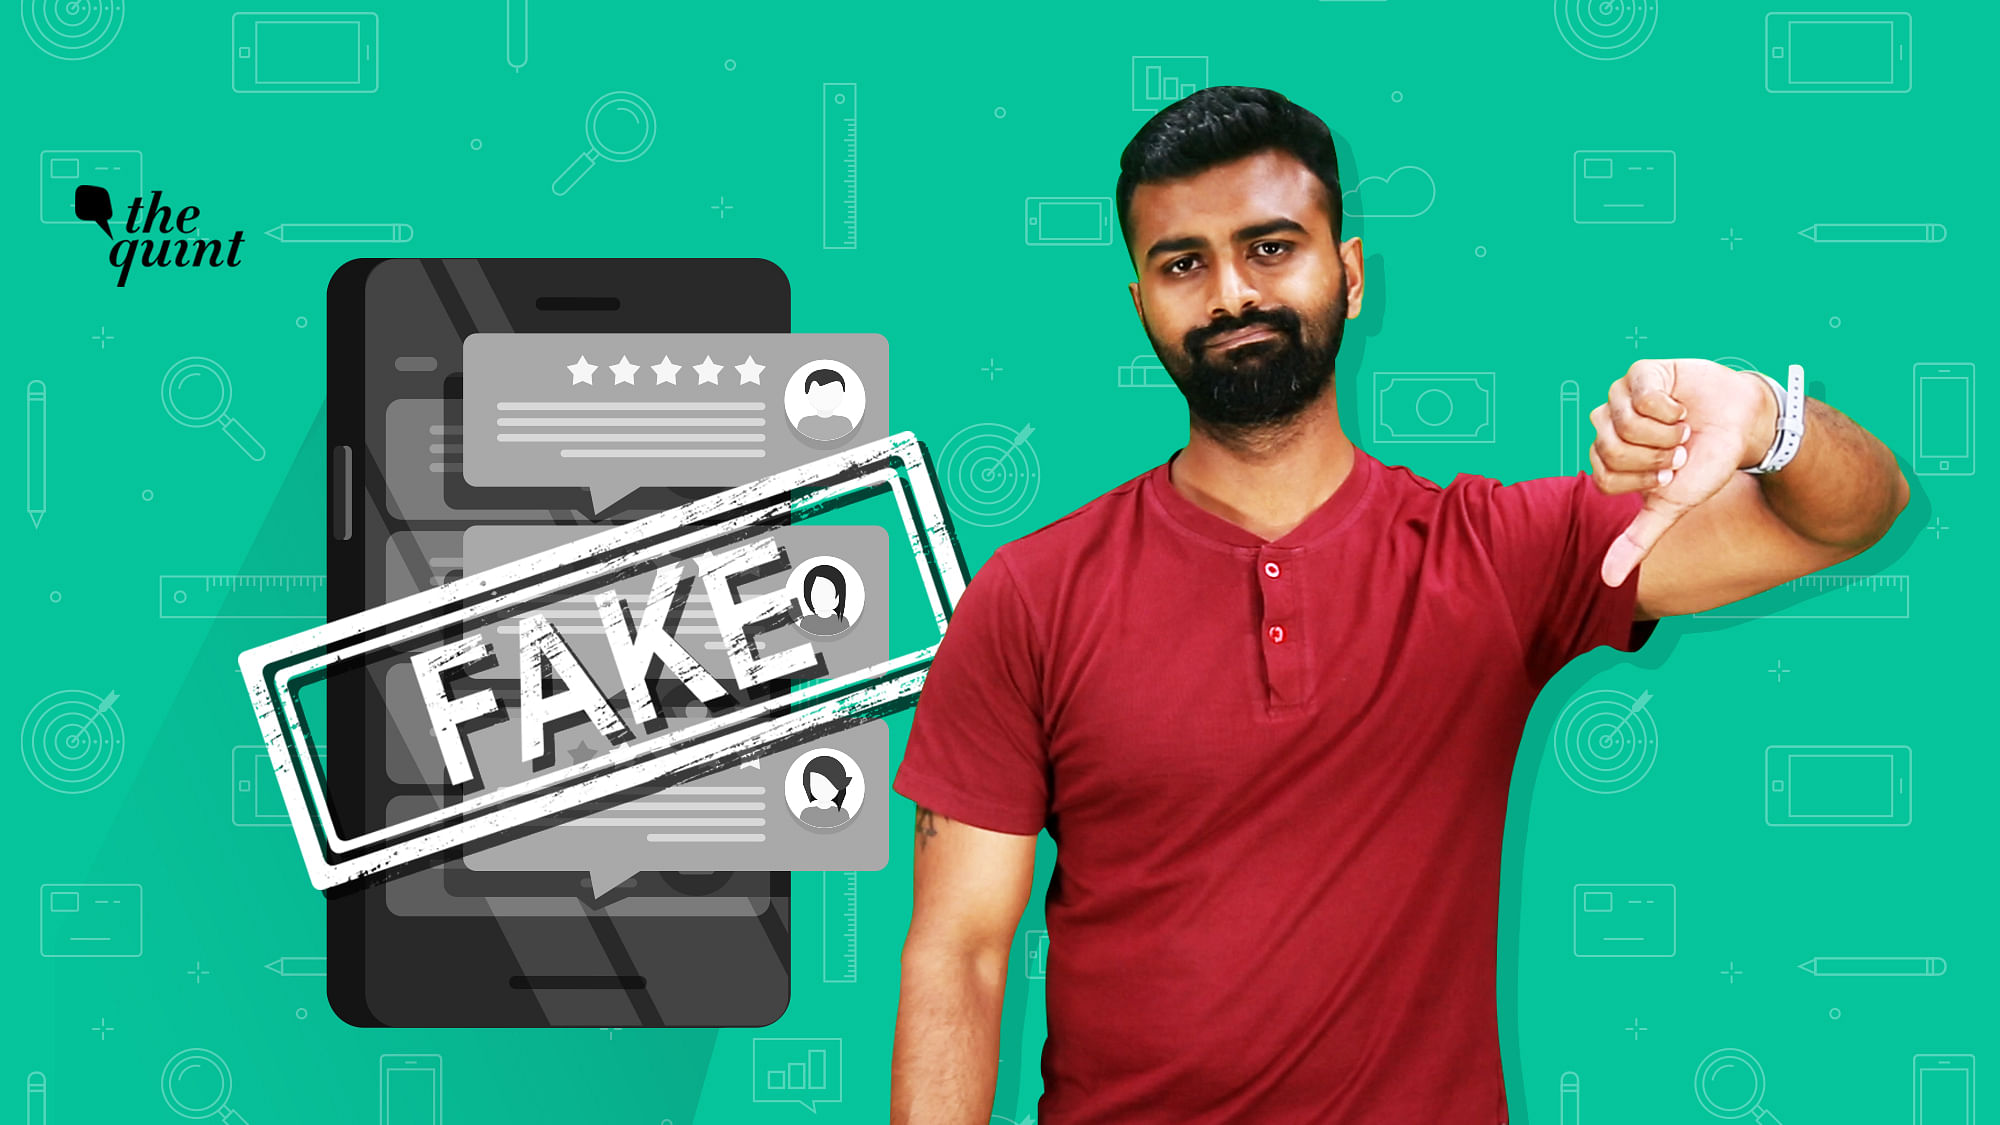 Fake customer reviews are prevalent on shopping platforms online.